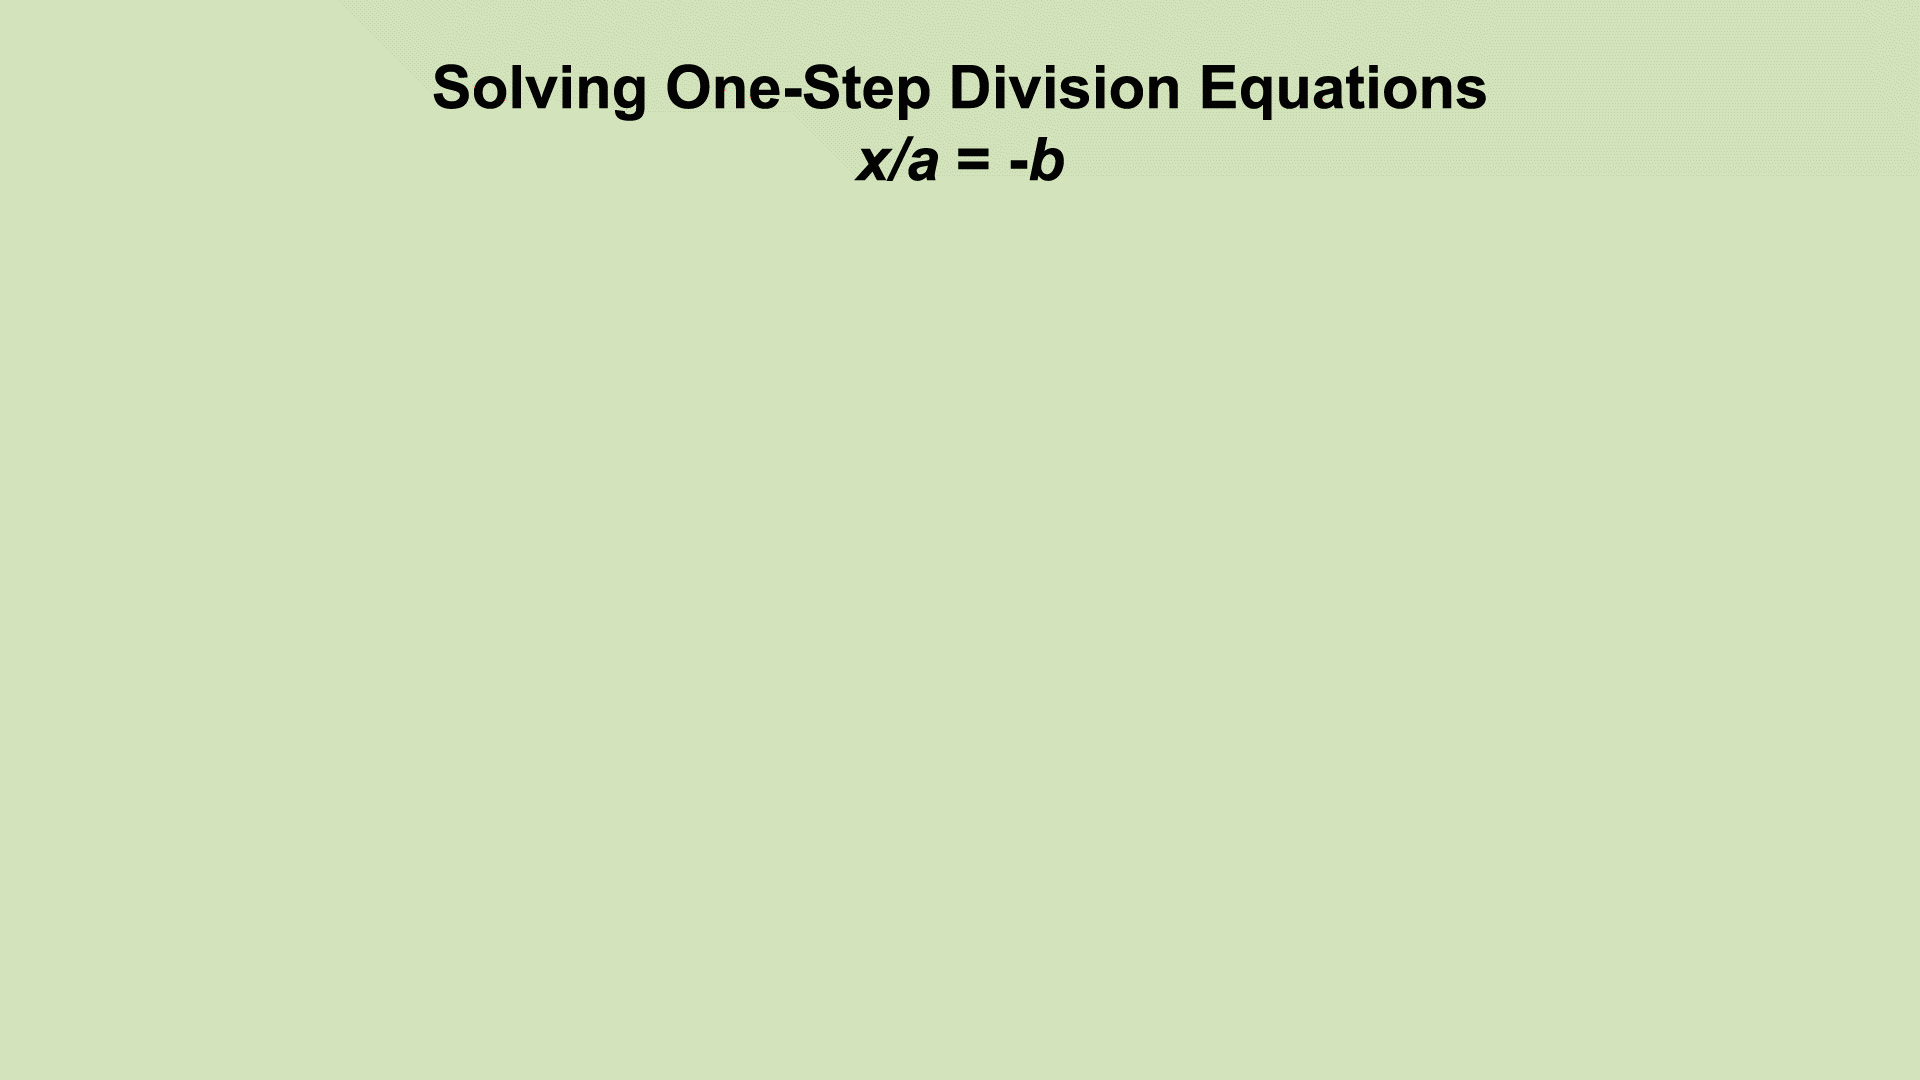 In this example the one-step equation shows division by a positive number.